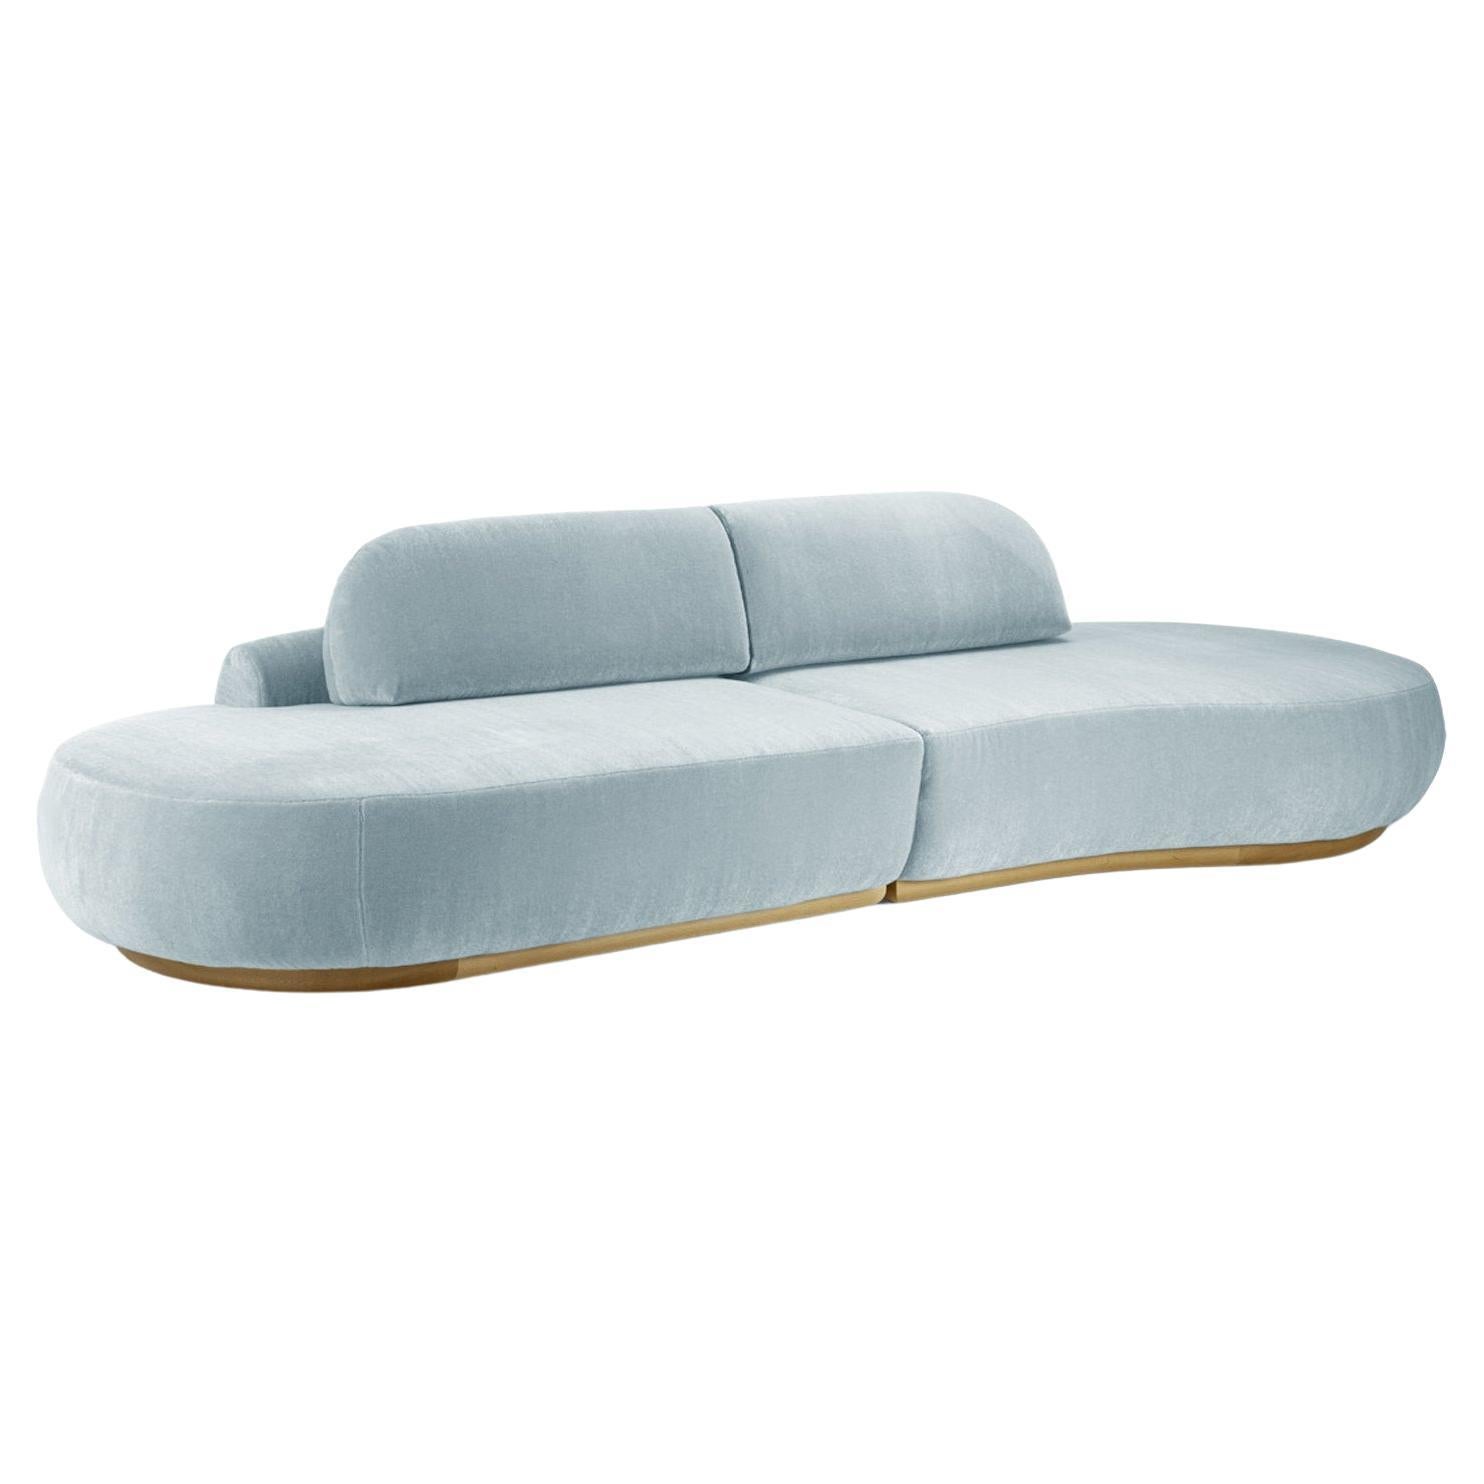 Naked Curved Sectional Sofa, 2 Piece with Natural Oak and Paris Safira